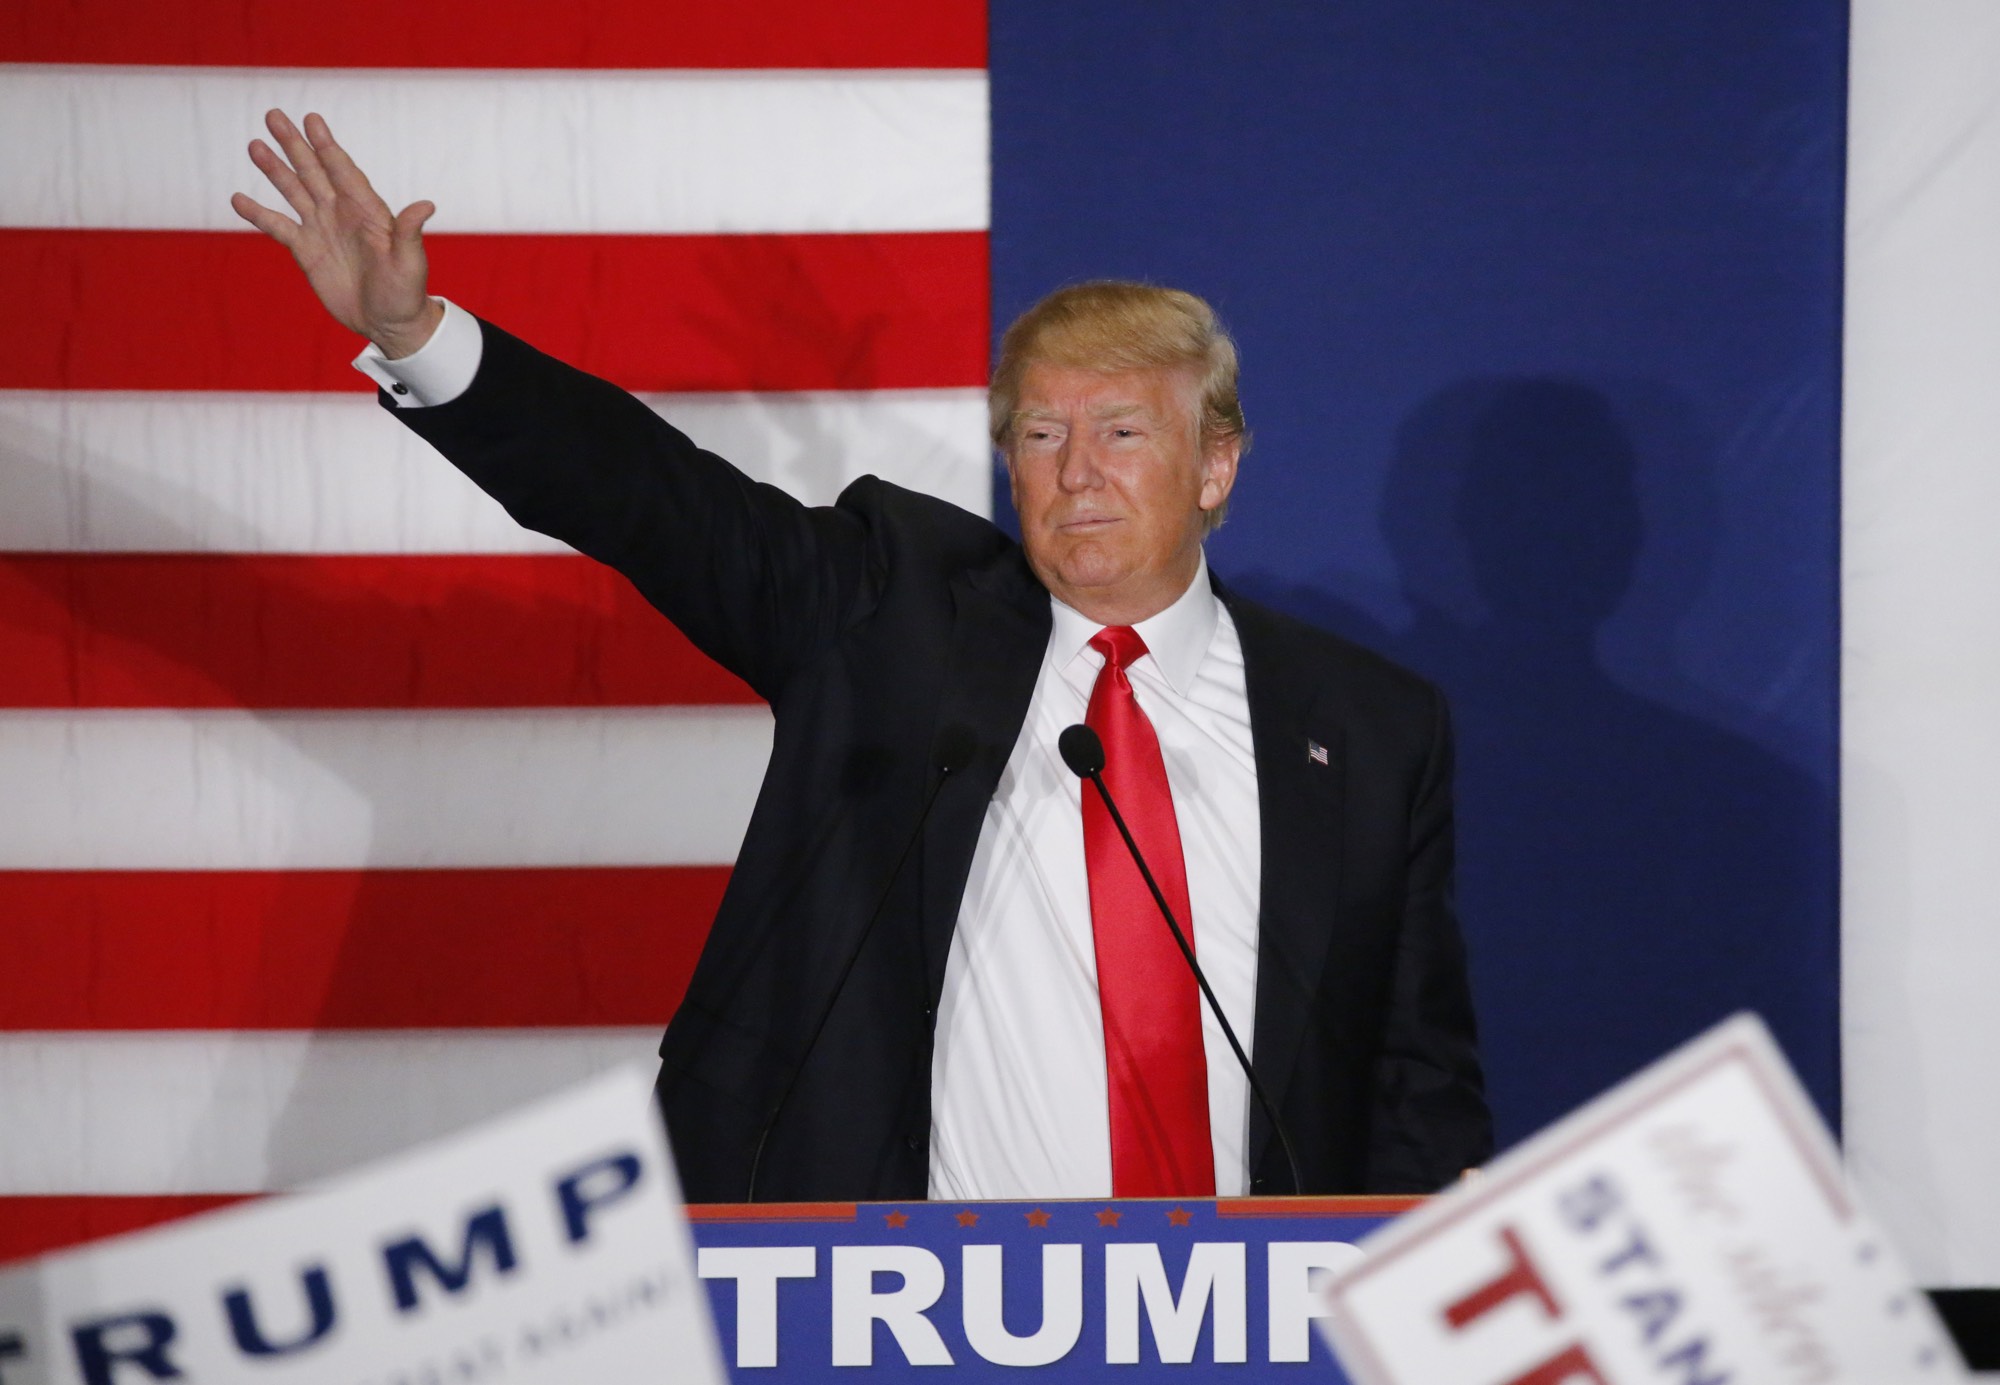 Donald Trump waves during a campaign rally in Cedar Rapids, Iowa Feb. 1, 2016. REUTERS